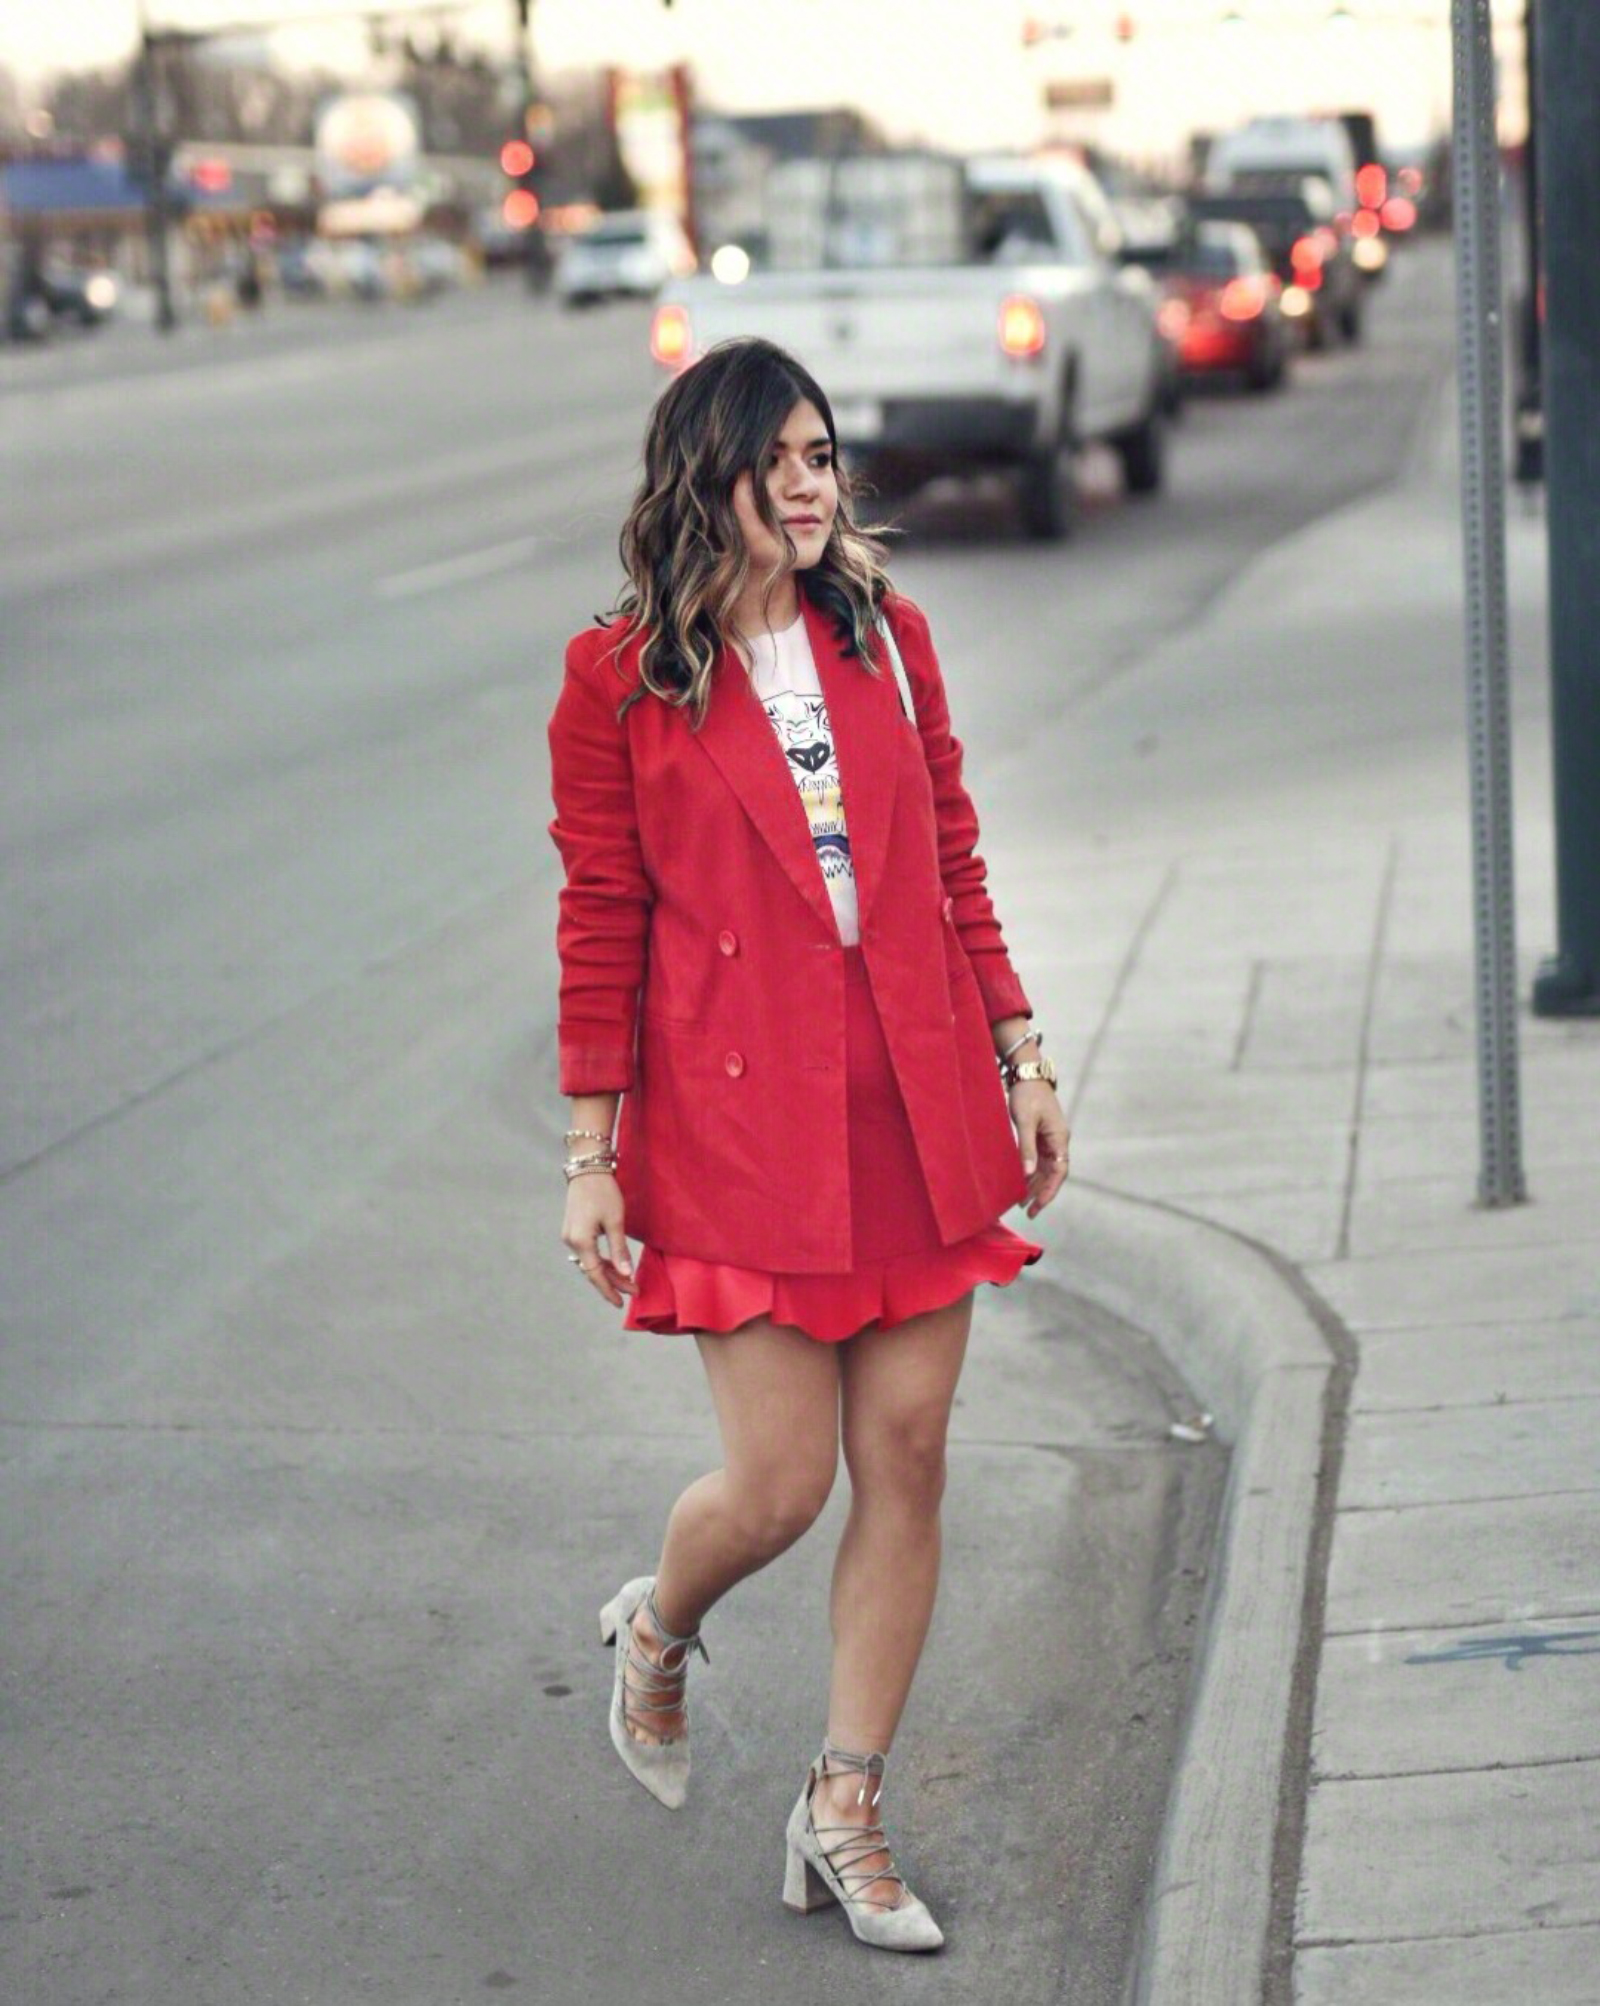 Carolina Hellal of Chic Talk styling red and pink together for spring - HOW TO STYLE RED AND PINK TOGETHER by popular Denver fashion blogger Chic Talk.